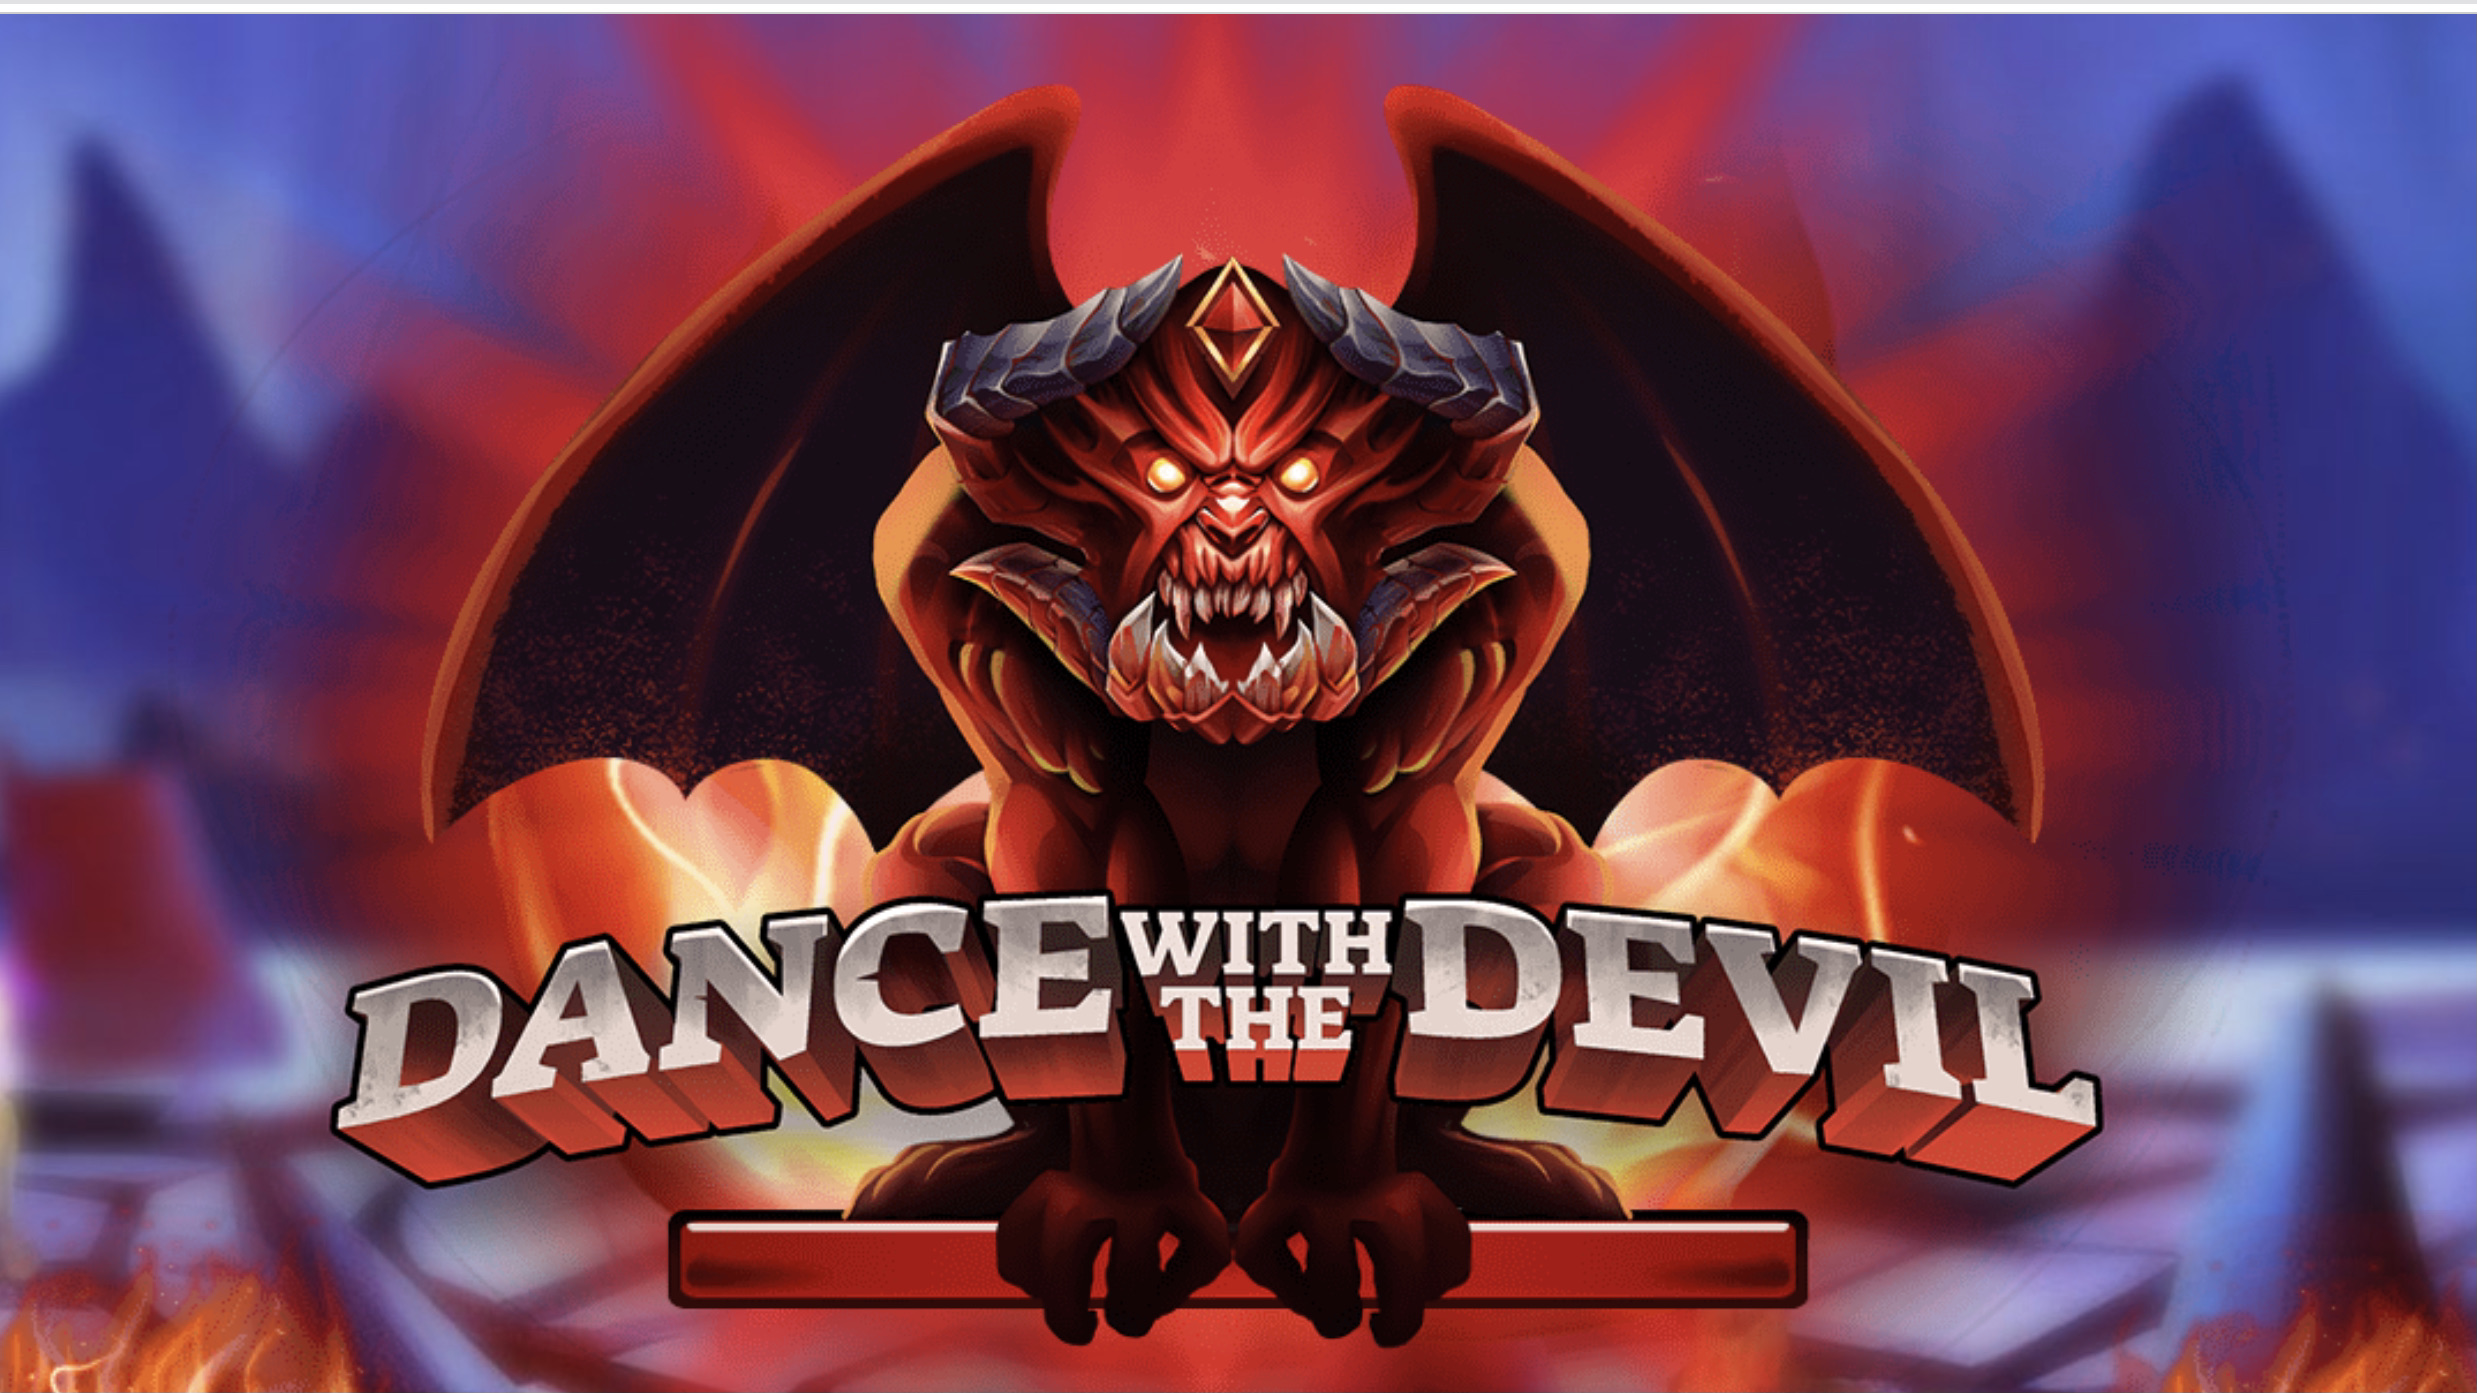 NEW SLOT DANCE WITH THE DEVIL BIG WIN   - 1XBET SLOTS - GAMBLING